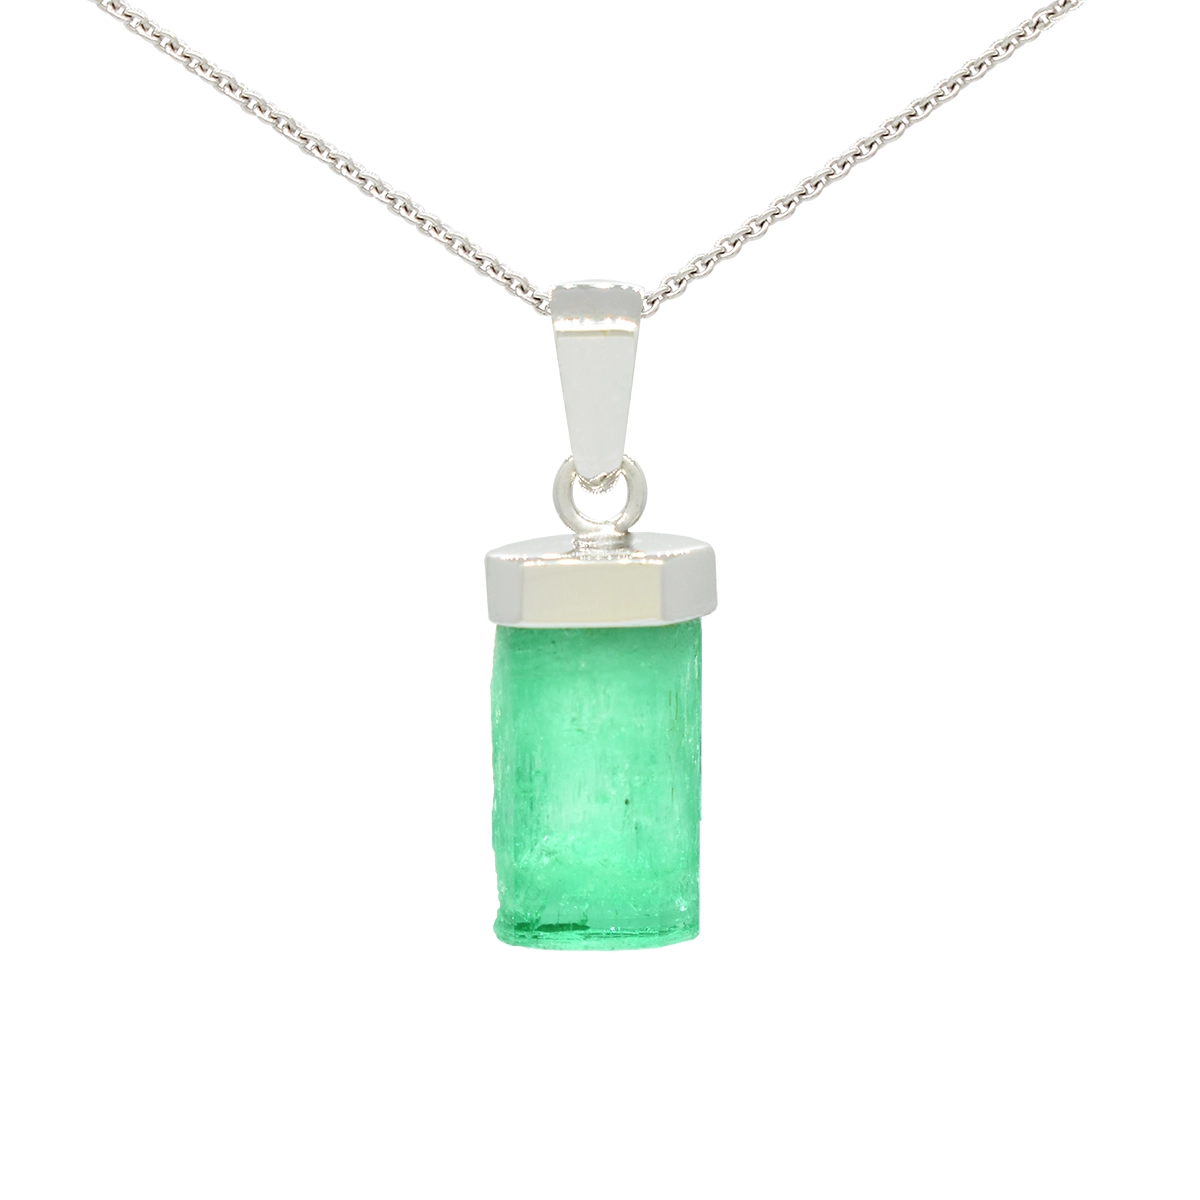 Emerald pendant Necklace with 5.66 carats uncut natural Colombian emerald set in 18K white gold solitaire style